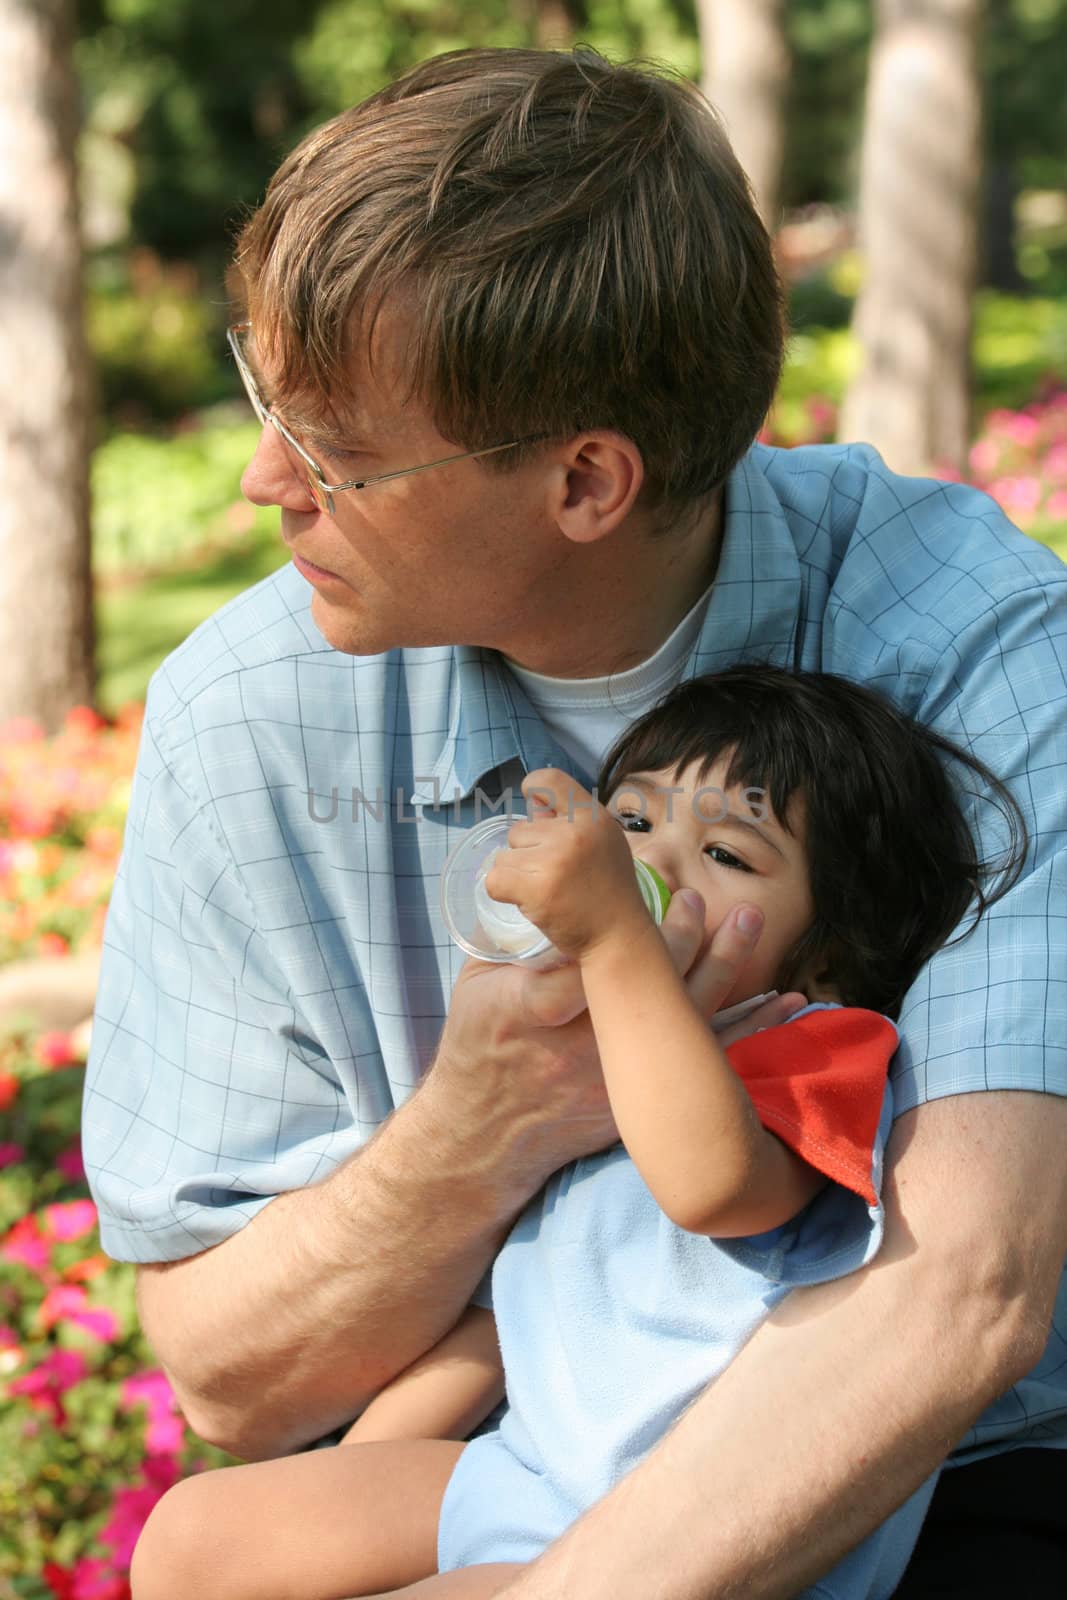 Father feeding baby a bottle in the park